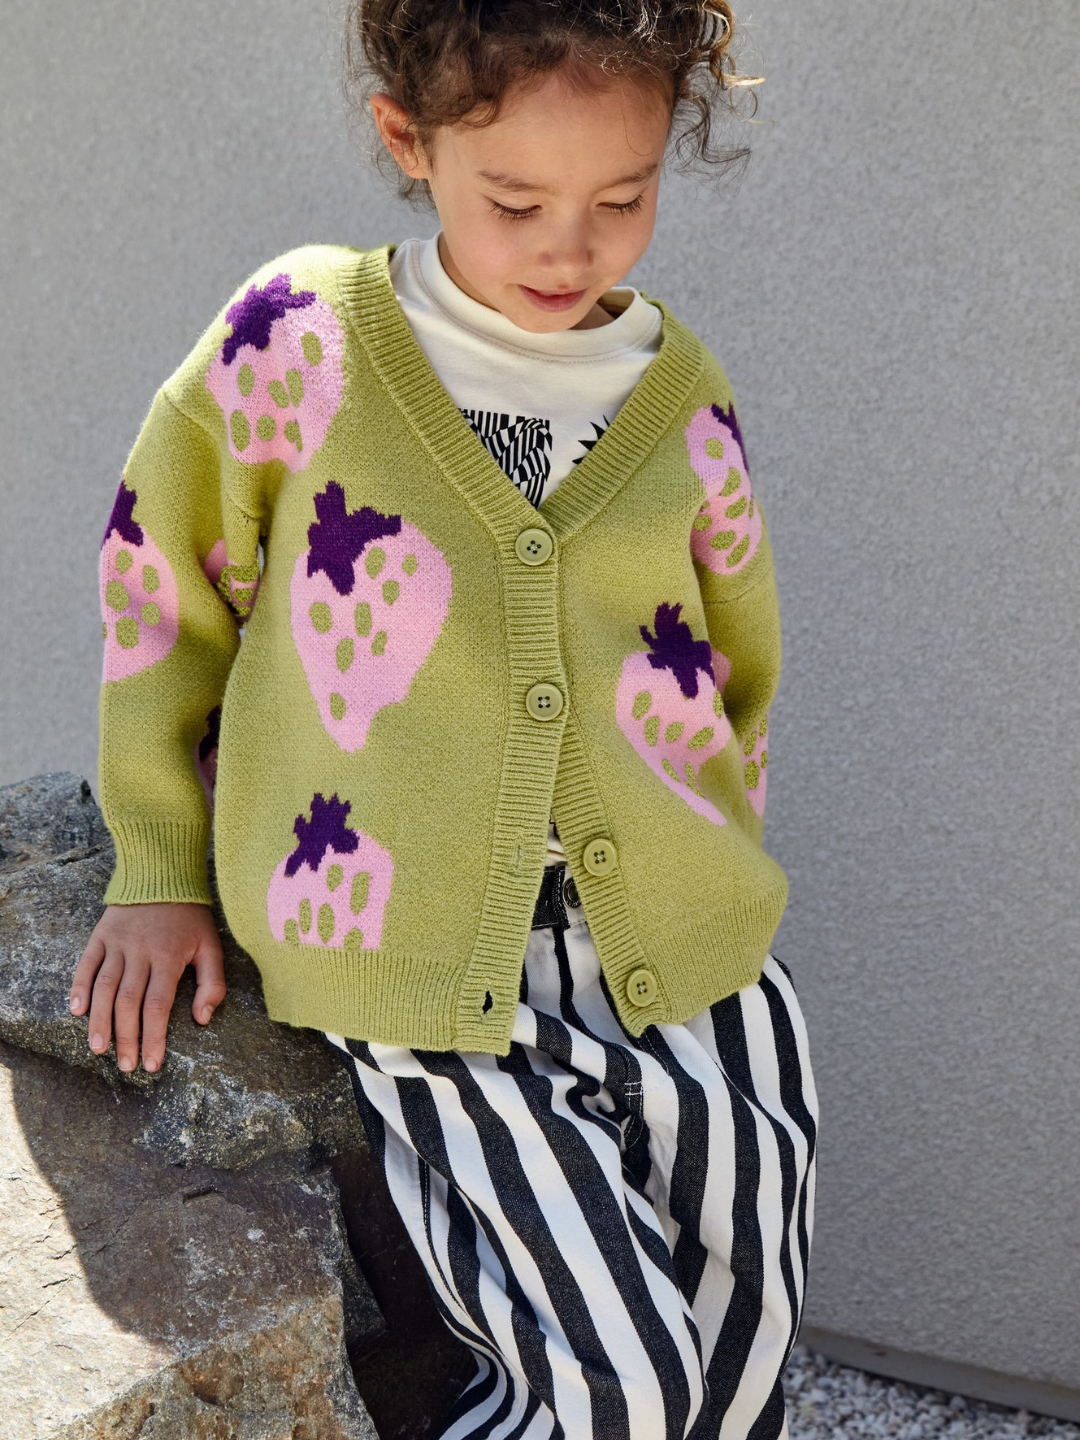 Pistachio | A child wearing a kids v-neck cardigan in pistachio green with an all-over pattern of large pink strawberries with a purple leaf. Cardigan has 4 buttons.She wears it with a white graphic tee, black and white striped jeans, and is seated on a rock against a grey wall.